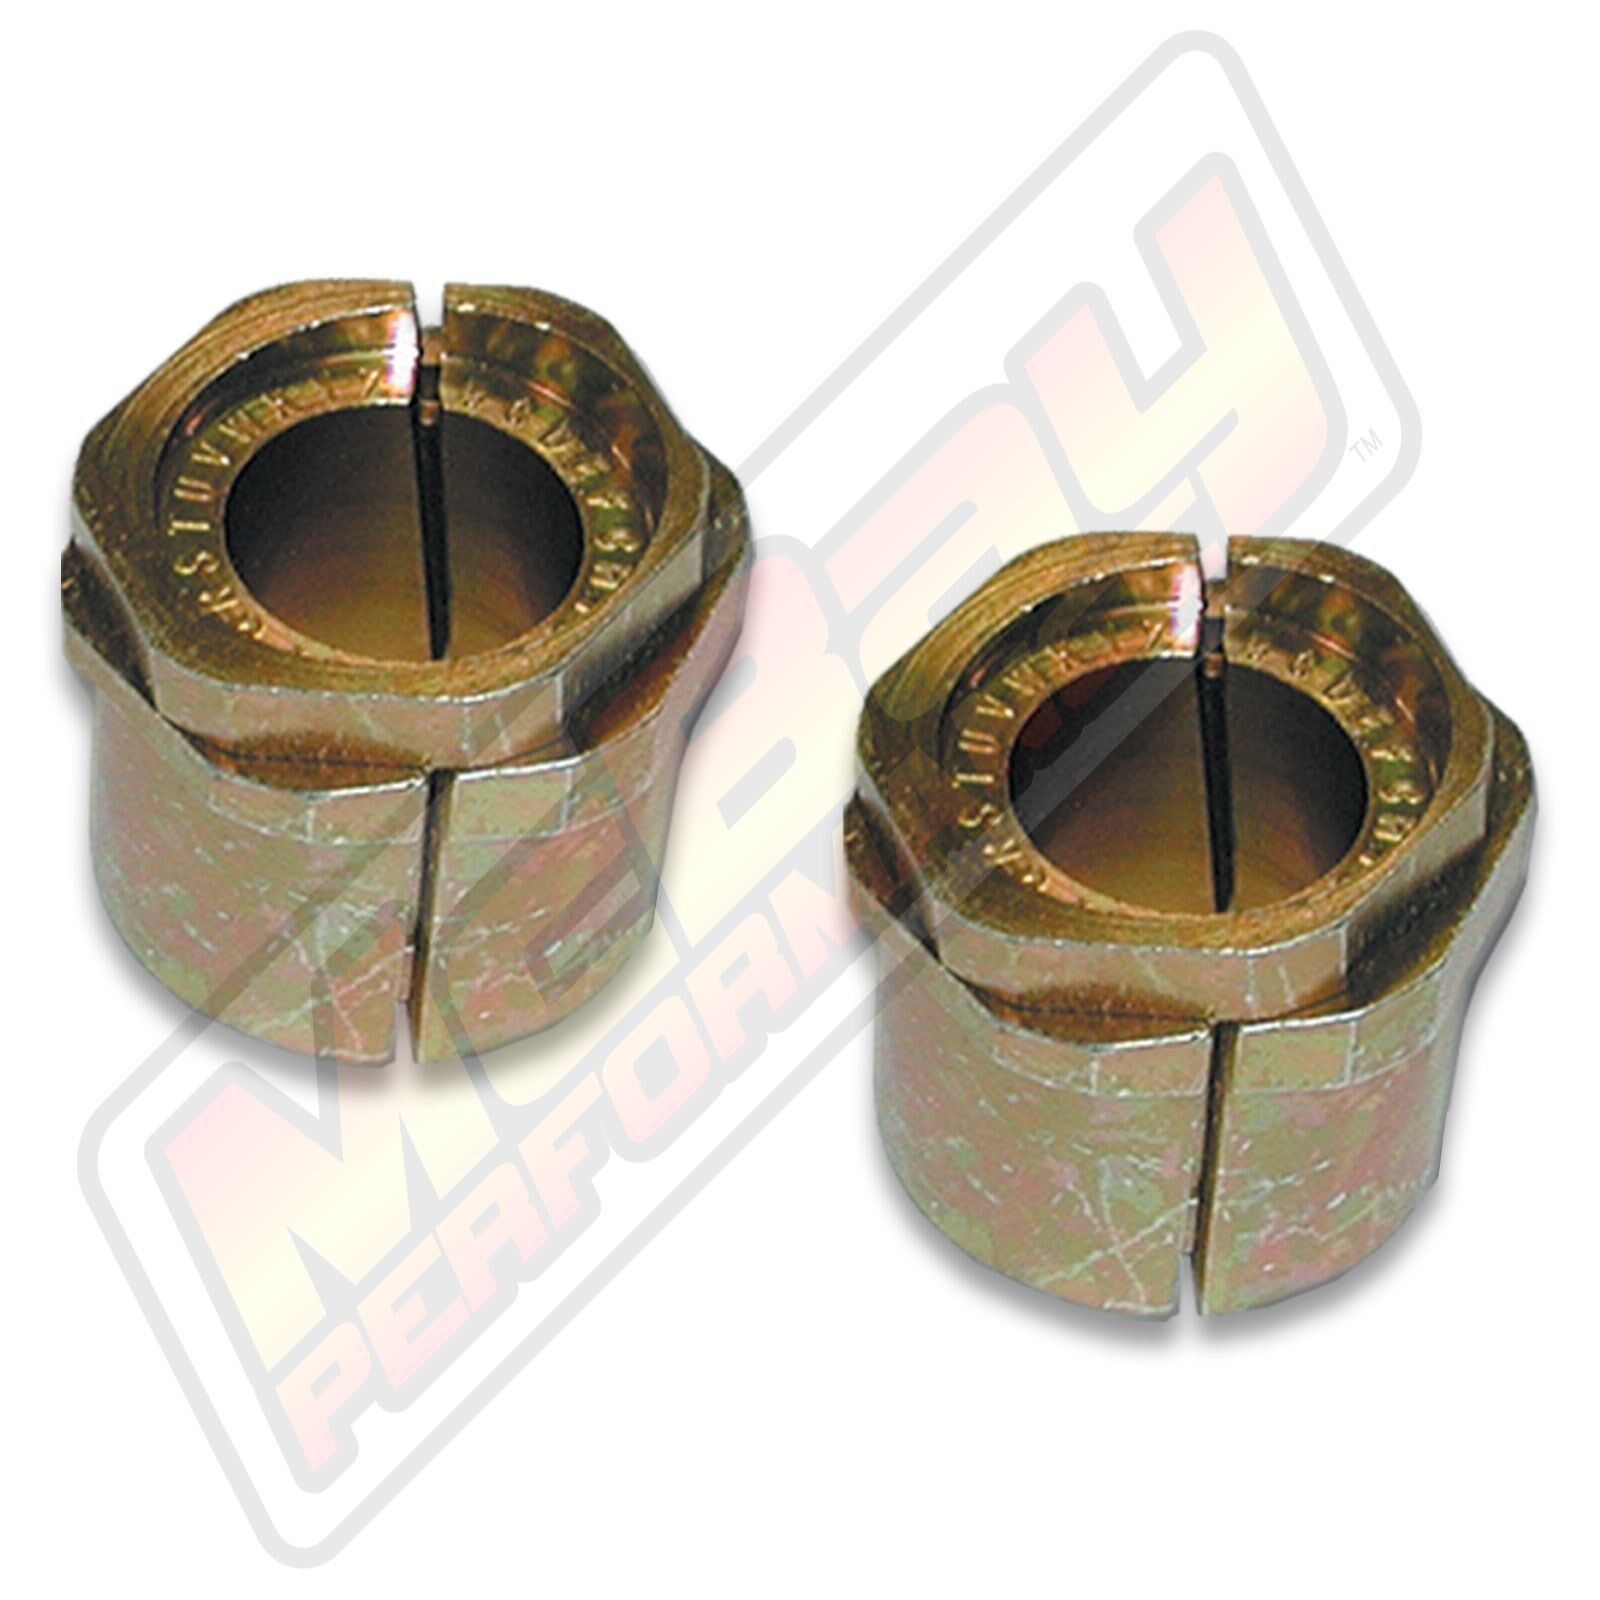 Extreme Camber Caster Alignment Bushing Set Ford 1987-2024 2WD Trucks MADE USA